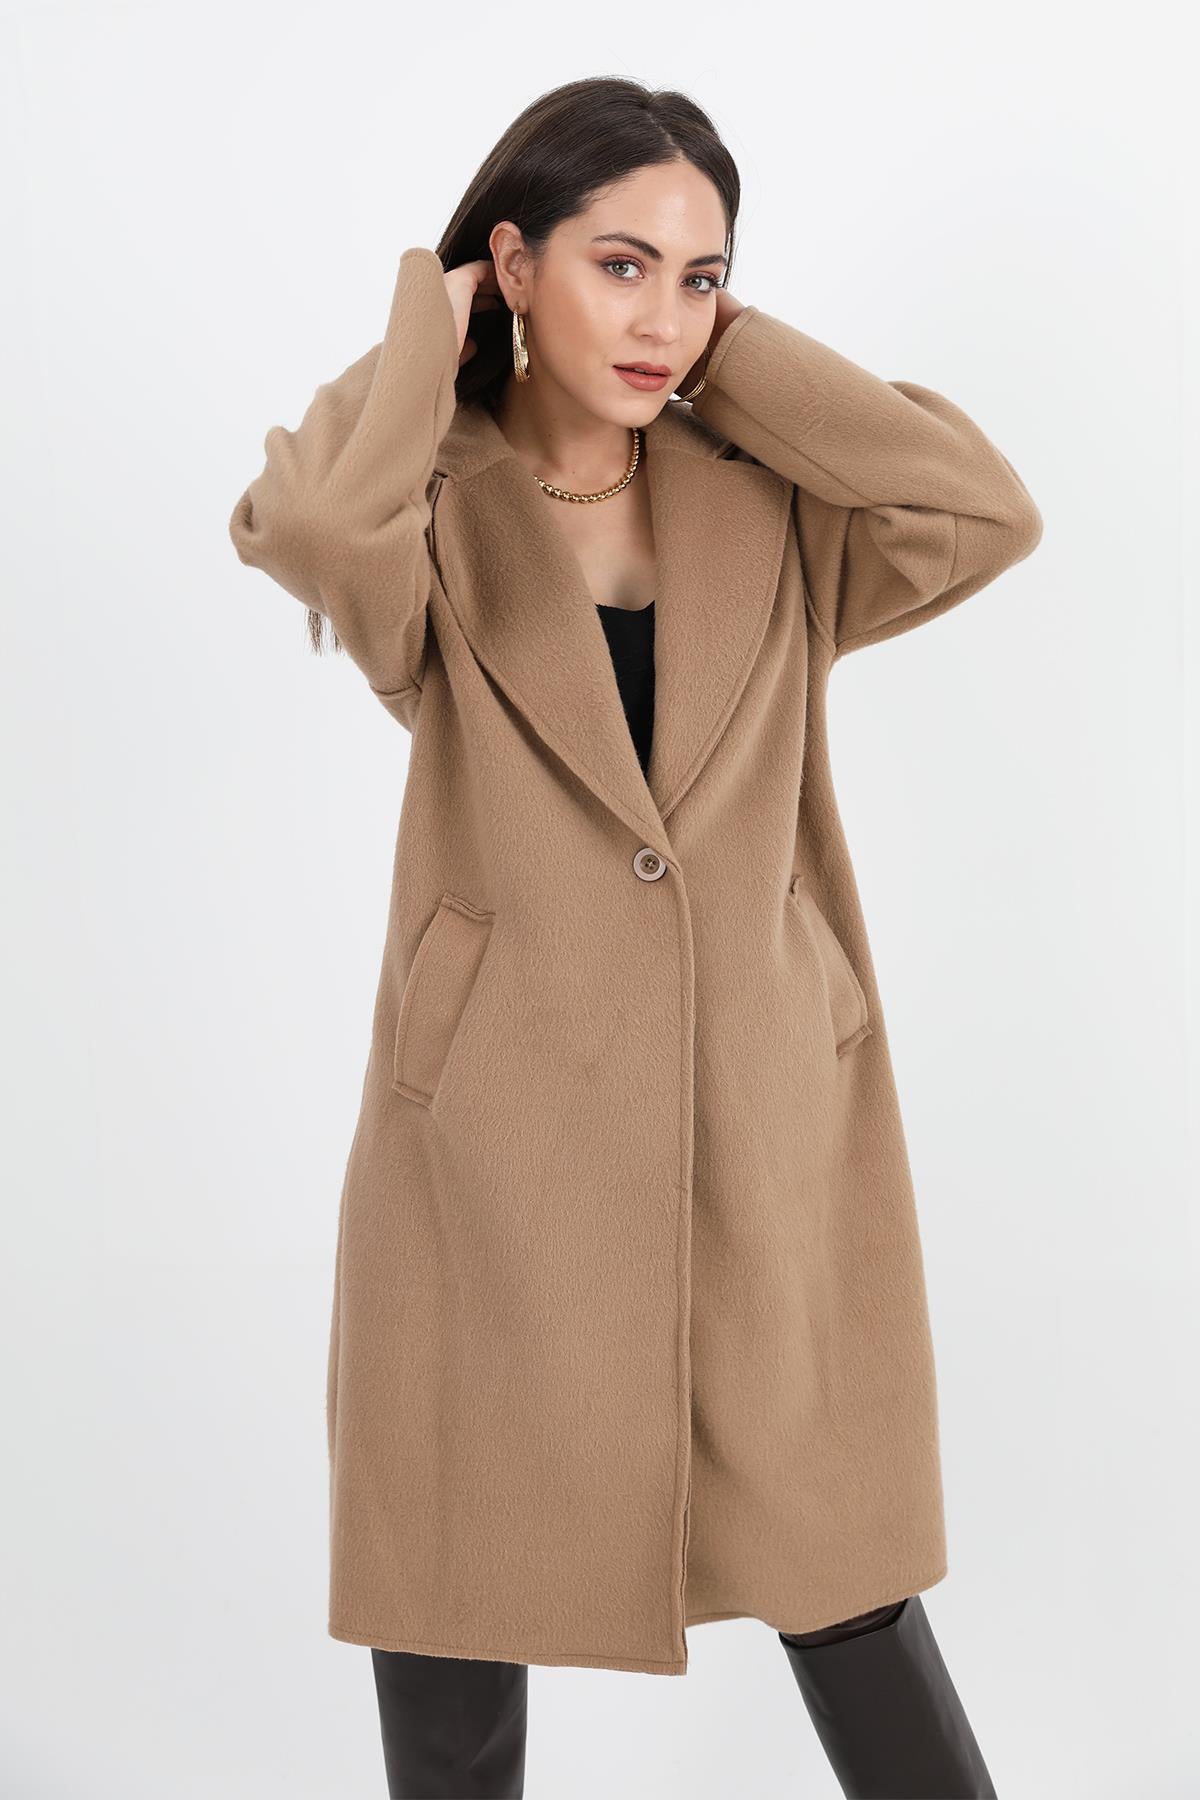 Women's Cashmere Coat Double Breasted Collar Sleeve with Emblem Detail - Camel - STREETMODE ™